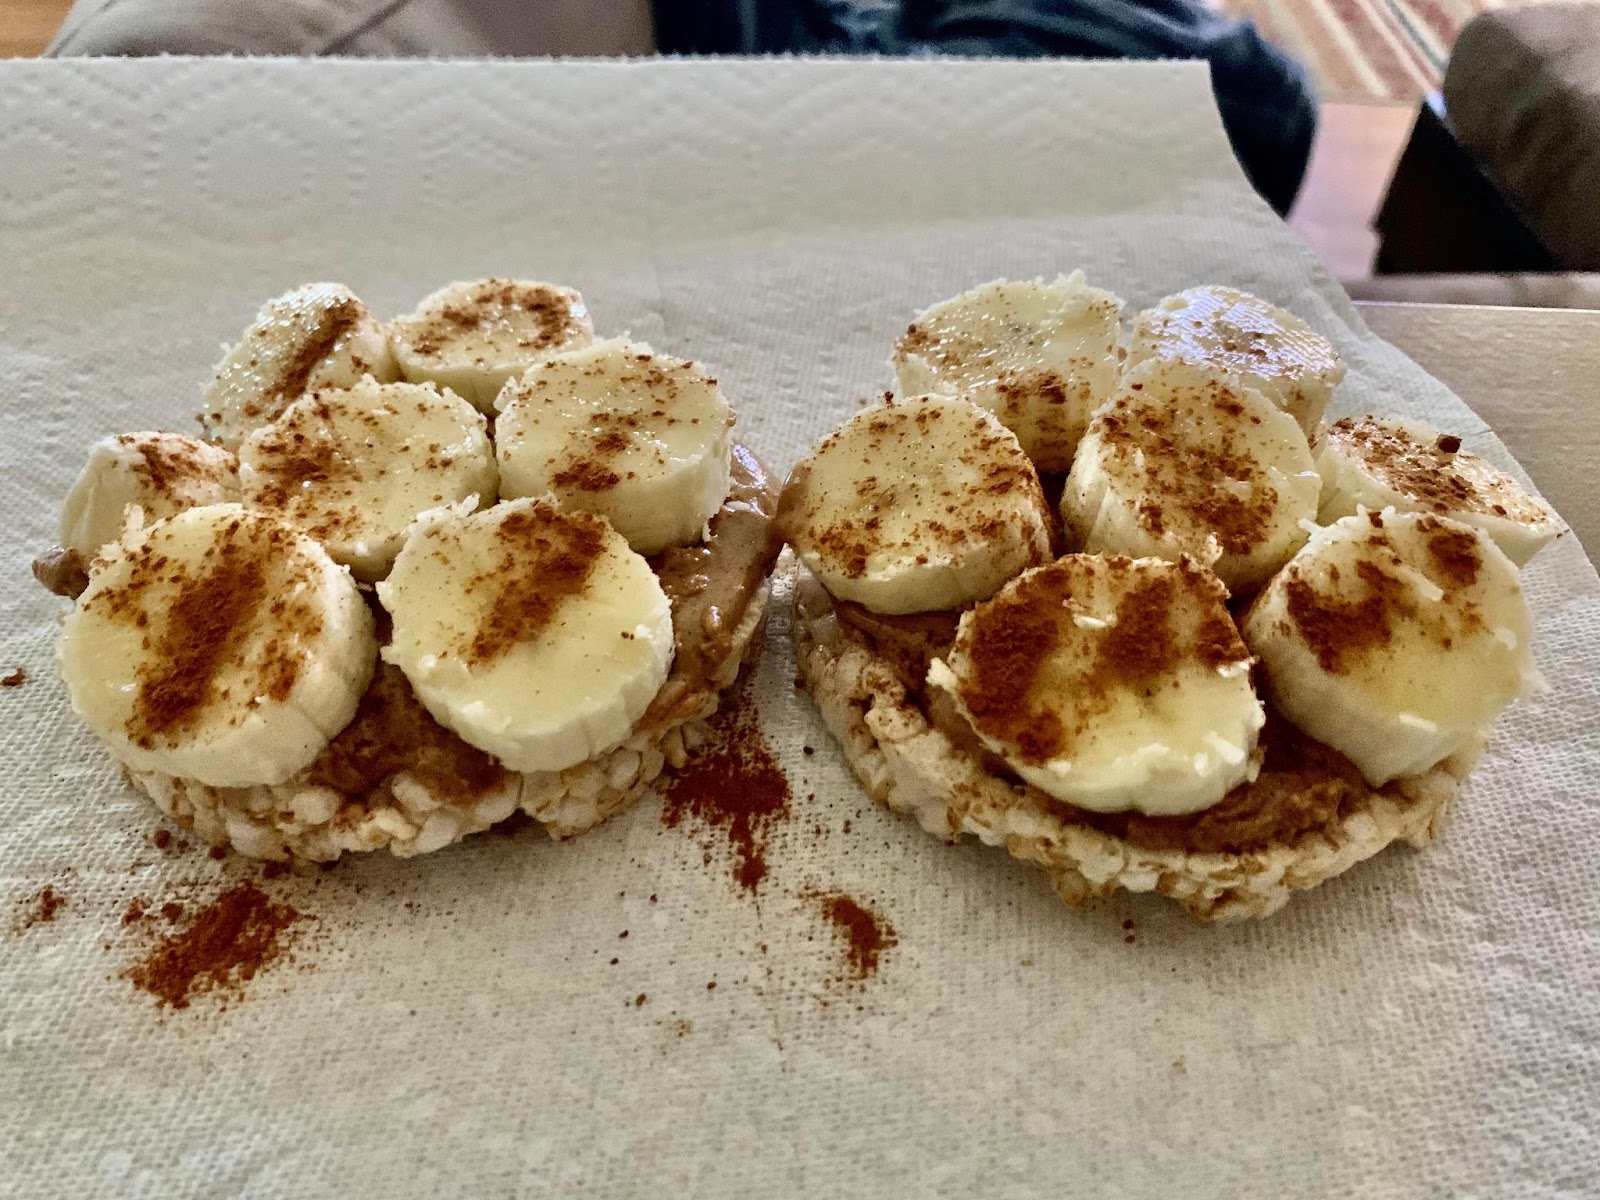 Rice Cake with Almond Butter and Banana Slice - Crunchy Veggie Sticks with Hummus: